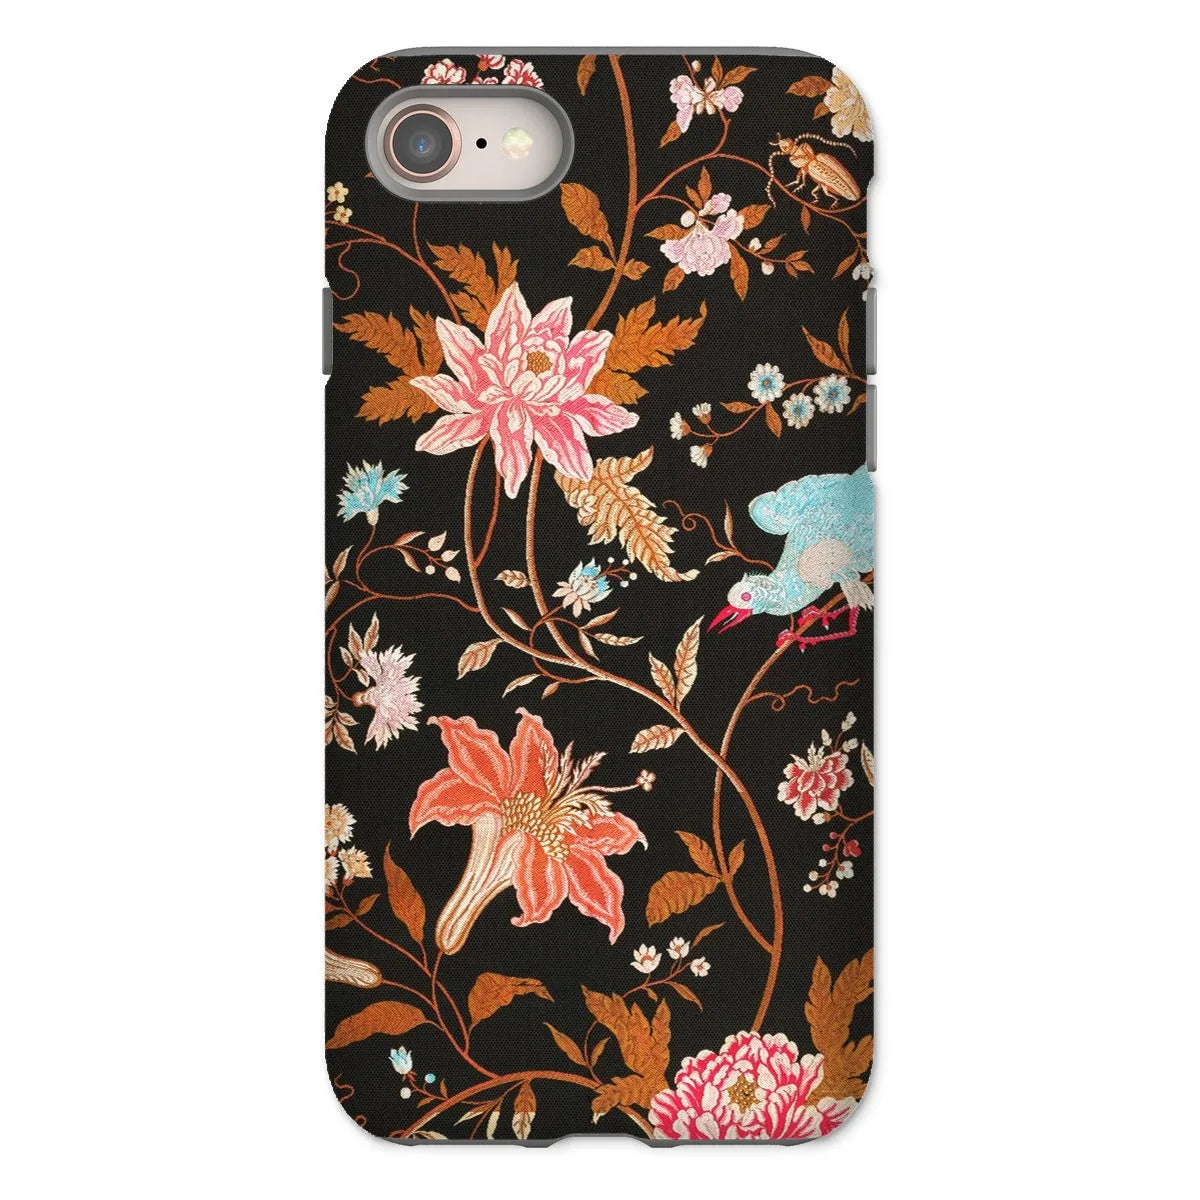 Midnight Call - Indian Aesthetic Fabric Art Phone Case - Iphone 8 / Matte - Mobile Phone Cases - Aesthetic Art